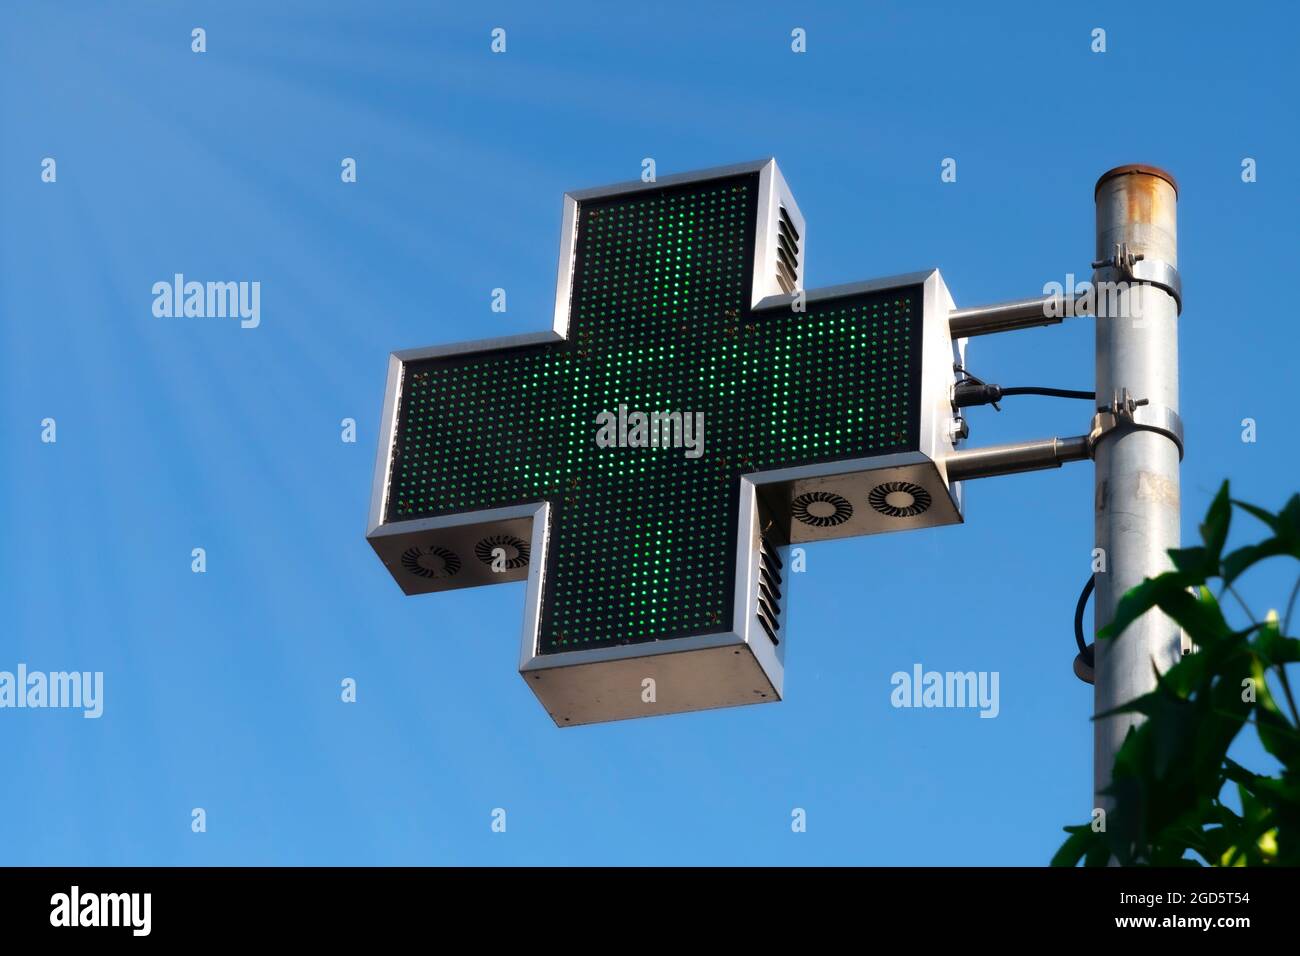 Pharmacy LED panel shows a temperature of 35 degrees celsius during a summer heat wave Stock Photo